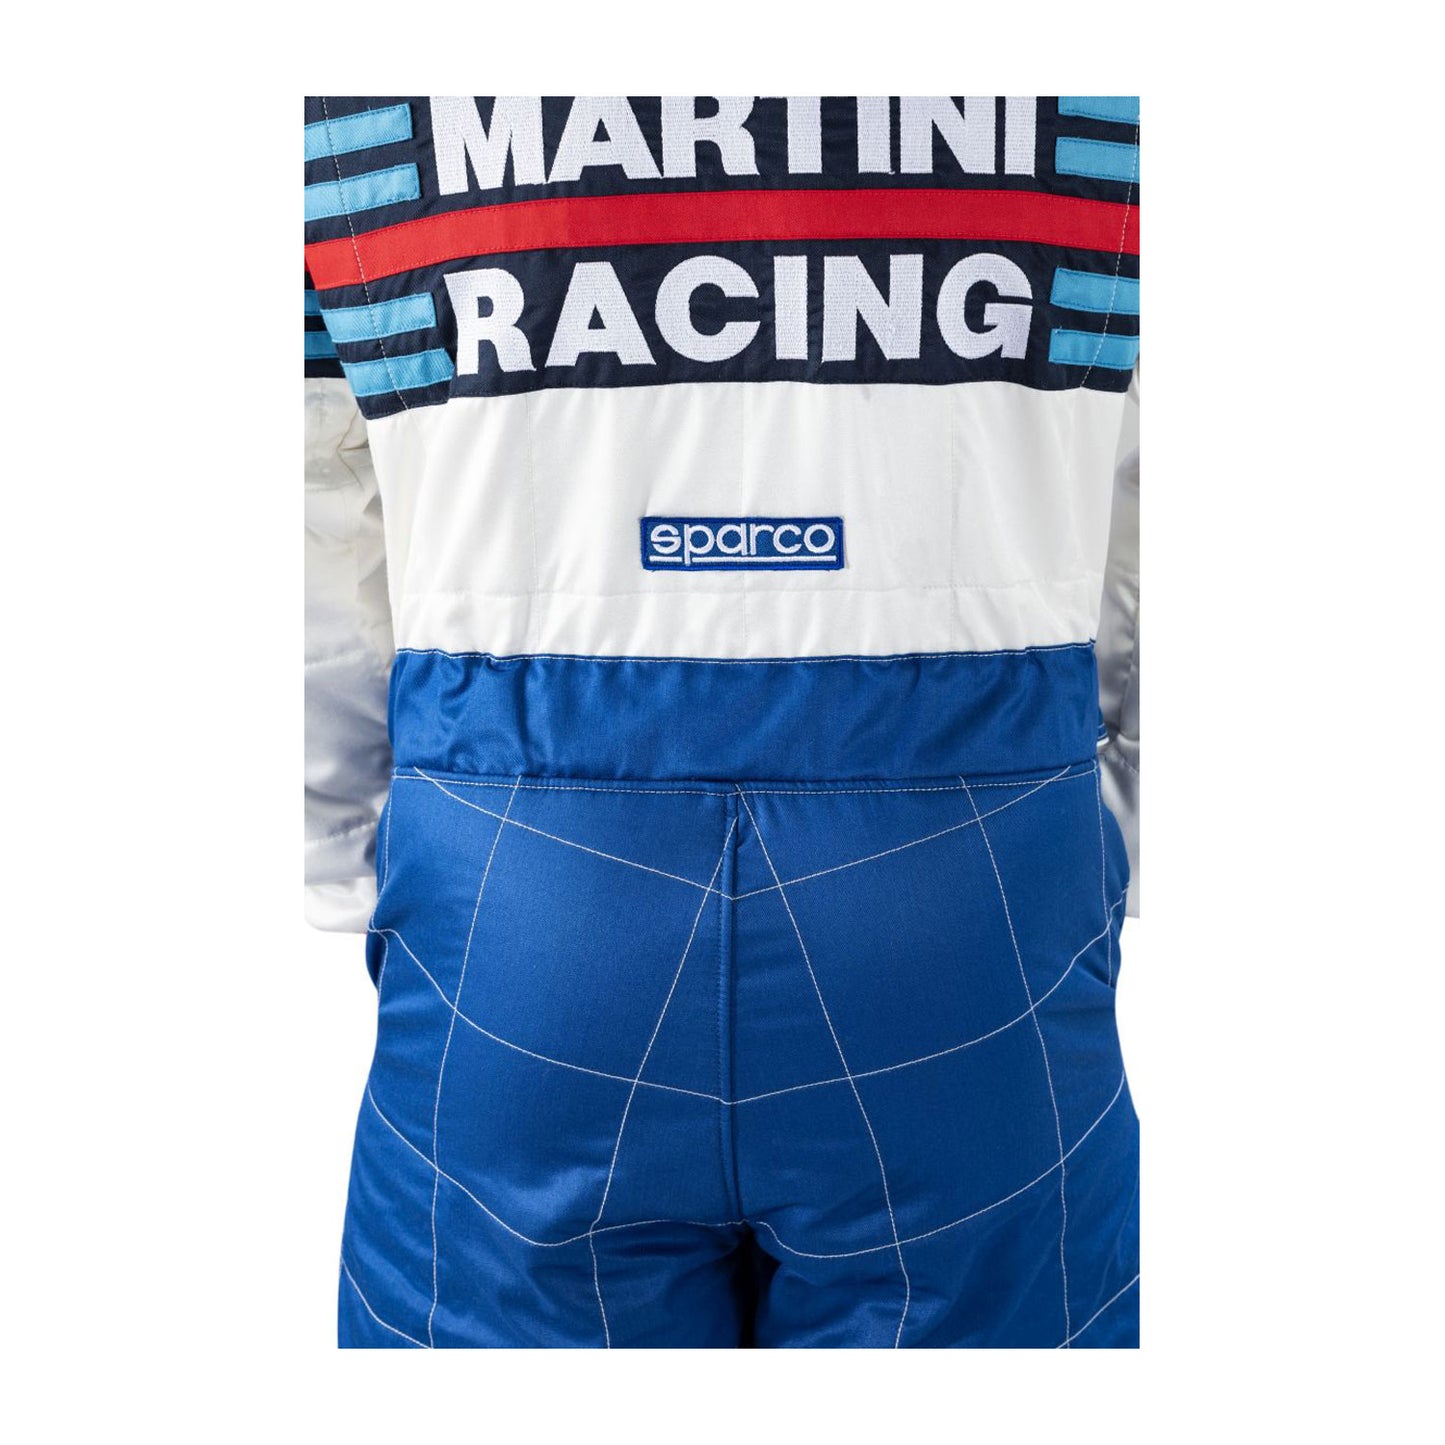 Sparco COMPETITION MARTINI RACING SuiT